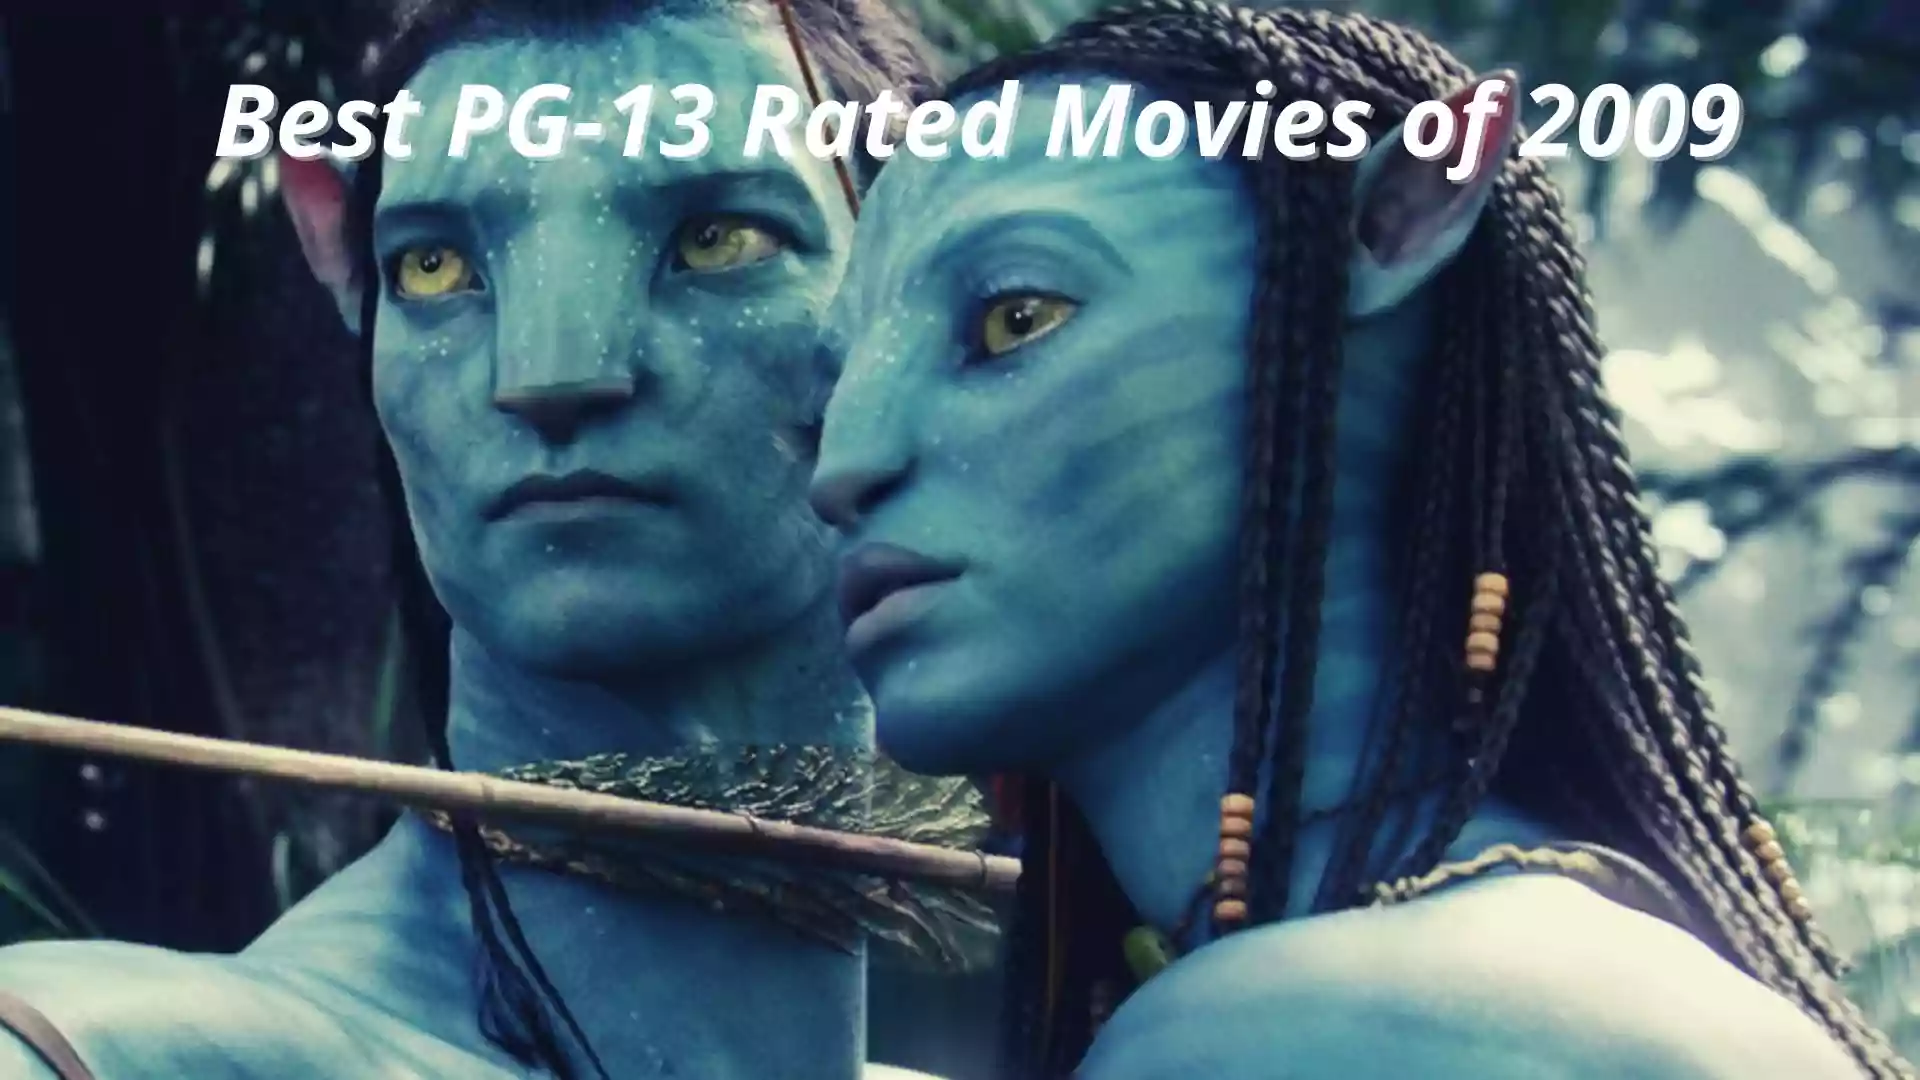 Best PG-13 Rated Movies of 2009